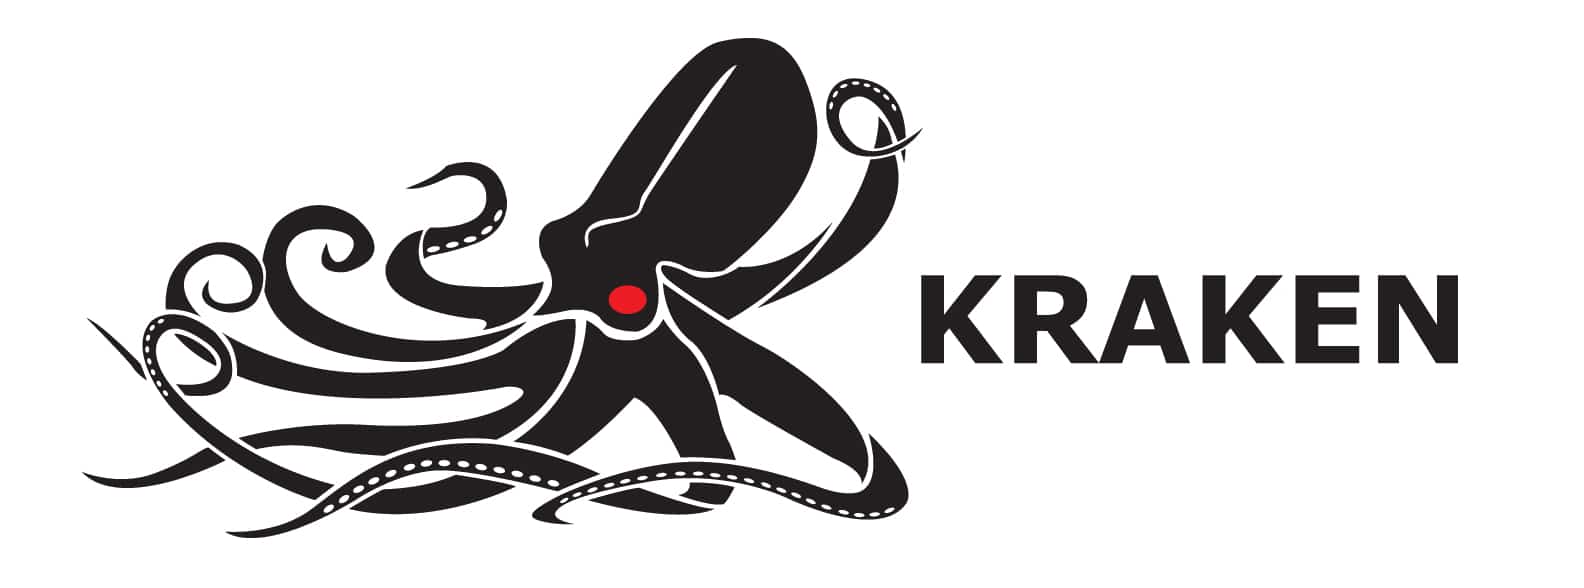 Kraken Awarded $7.1 Million of Contracts for Offshore Subsea Inspections